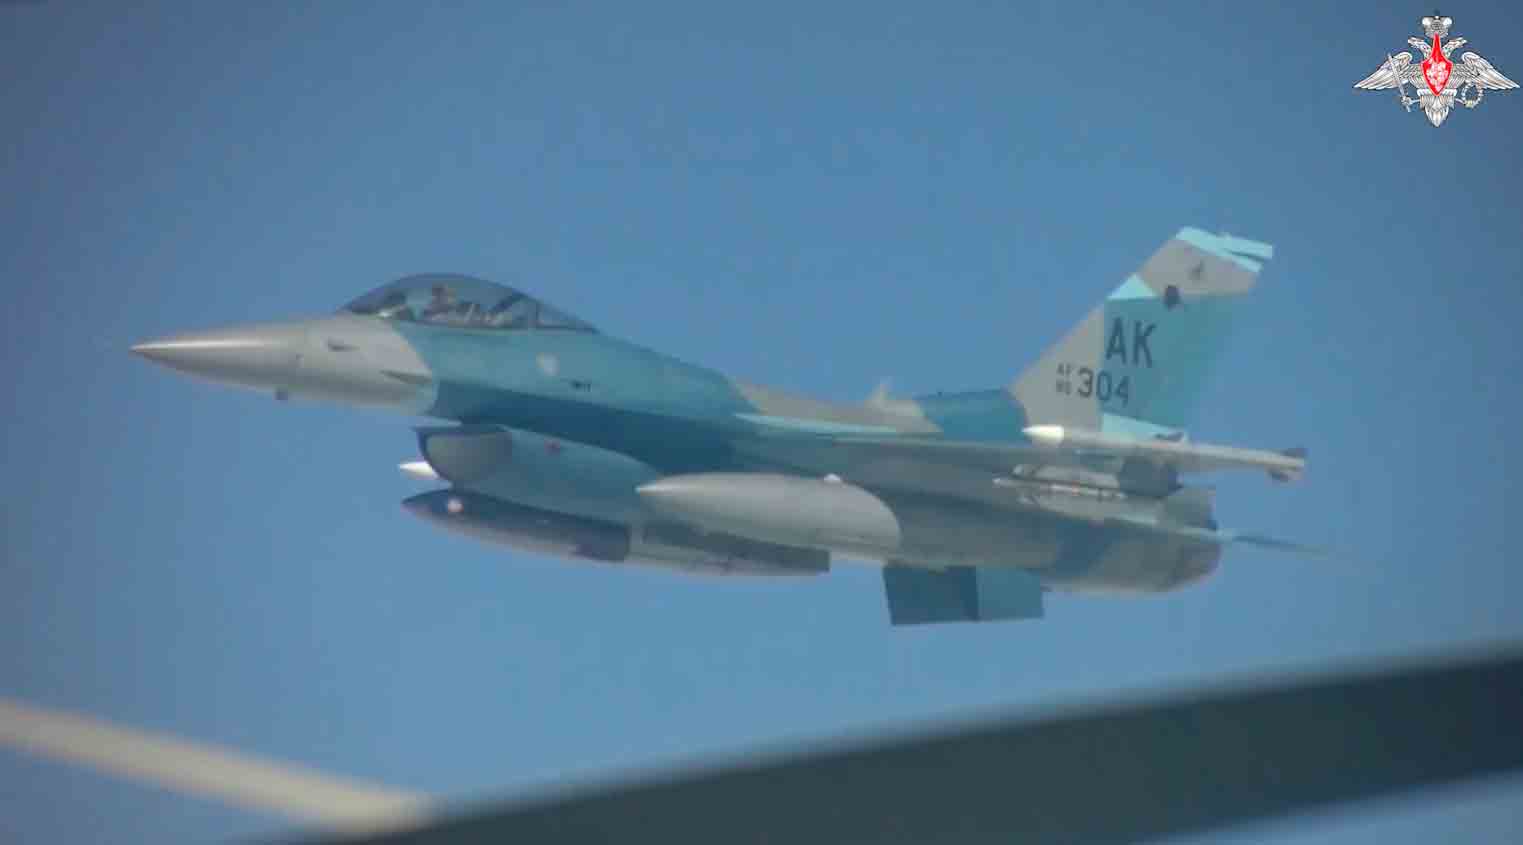 F-16C with a typical aggressor paint scheme,